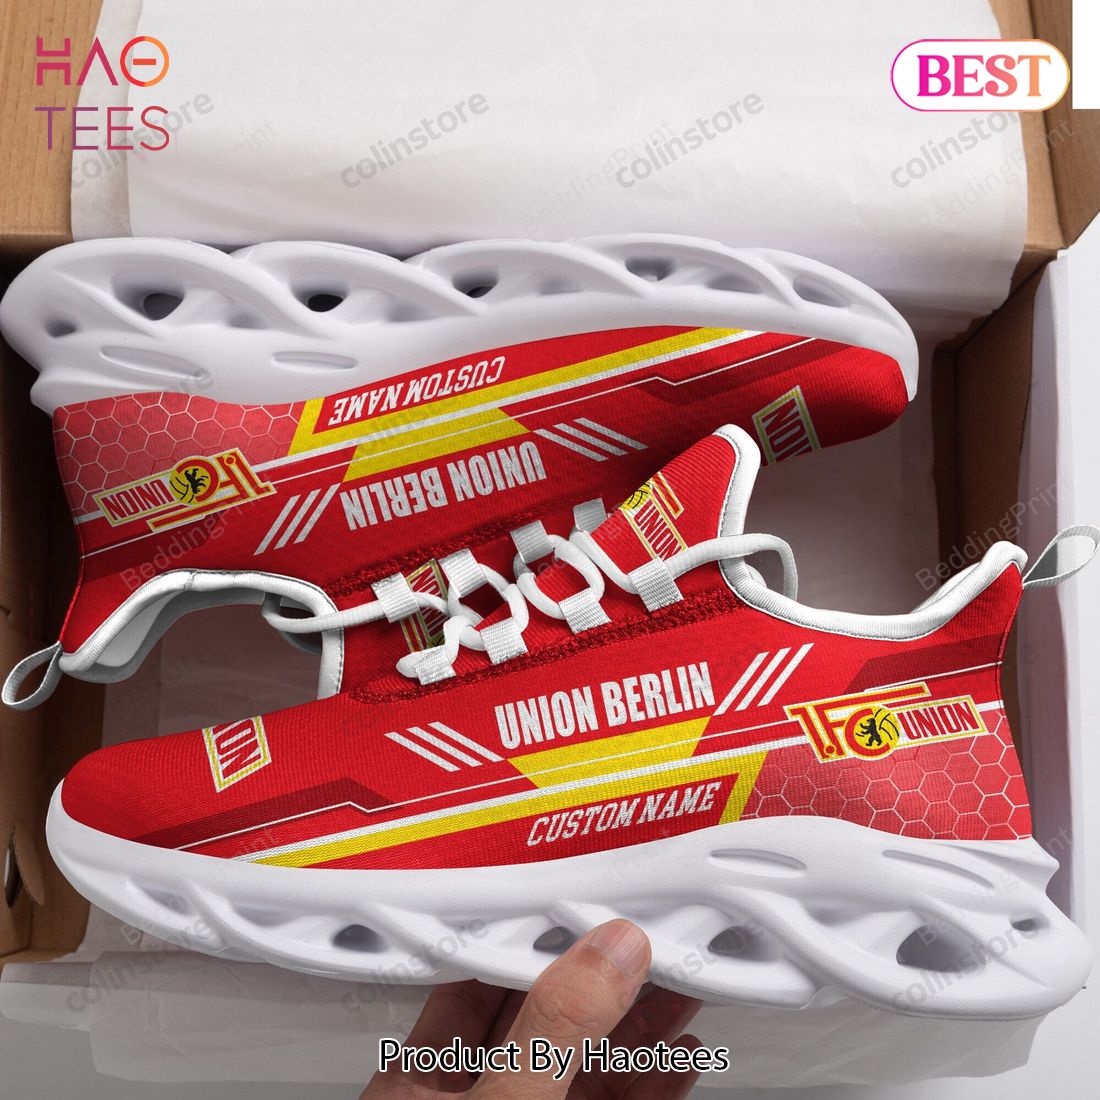 [Personalized Name] FC Union Berlin Bundesliga Max Soul Shoes